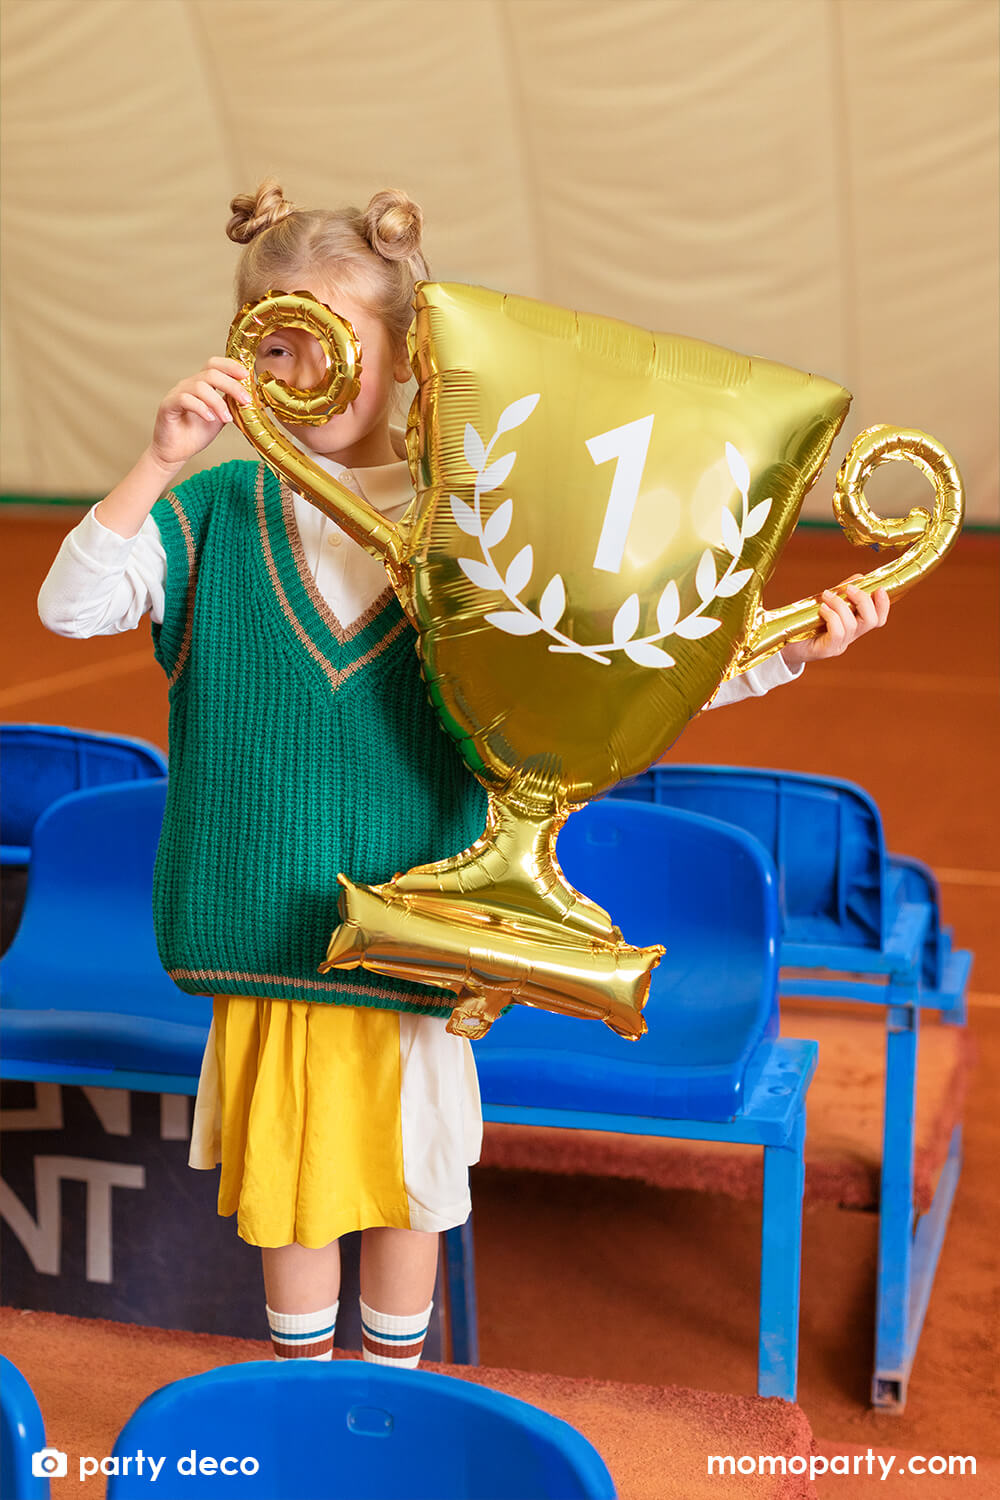 A little girl in school uniform holding party deco's Party Deco's 28" gold cup trophy shaped foil balloon in glossy material with number 1 on it, celebrating her win in a tennis court